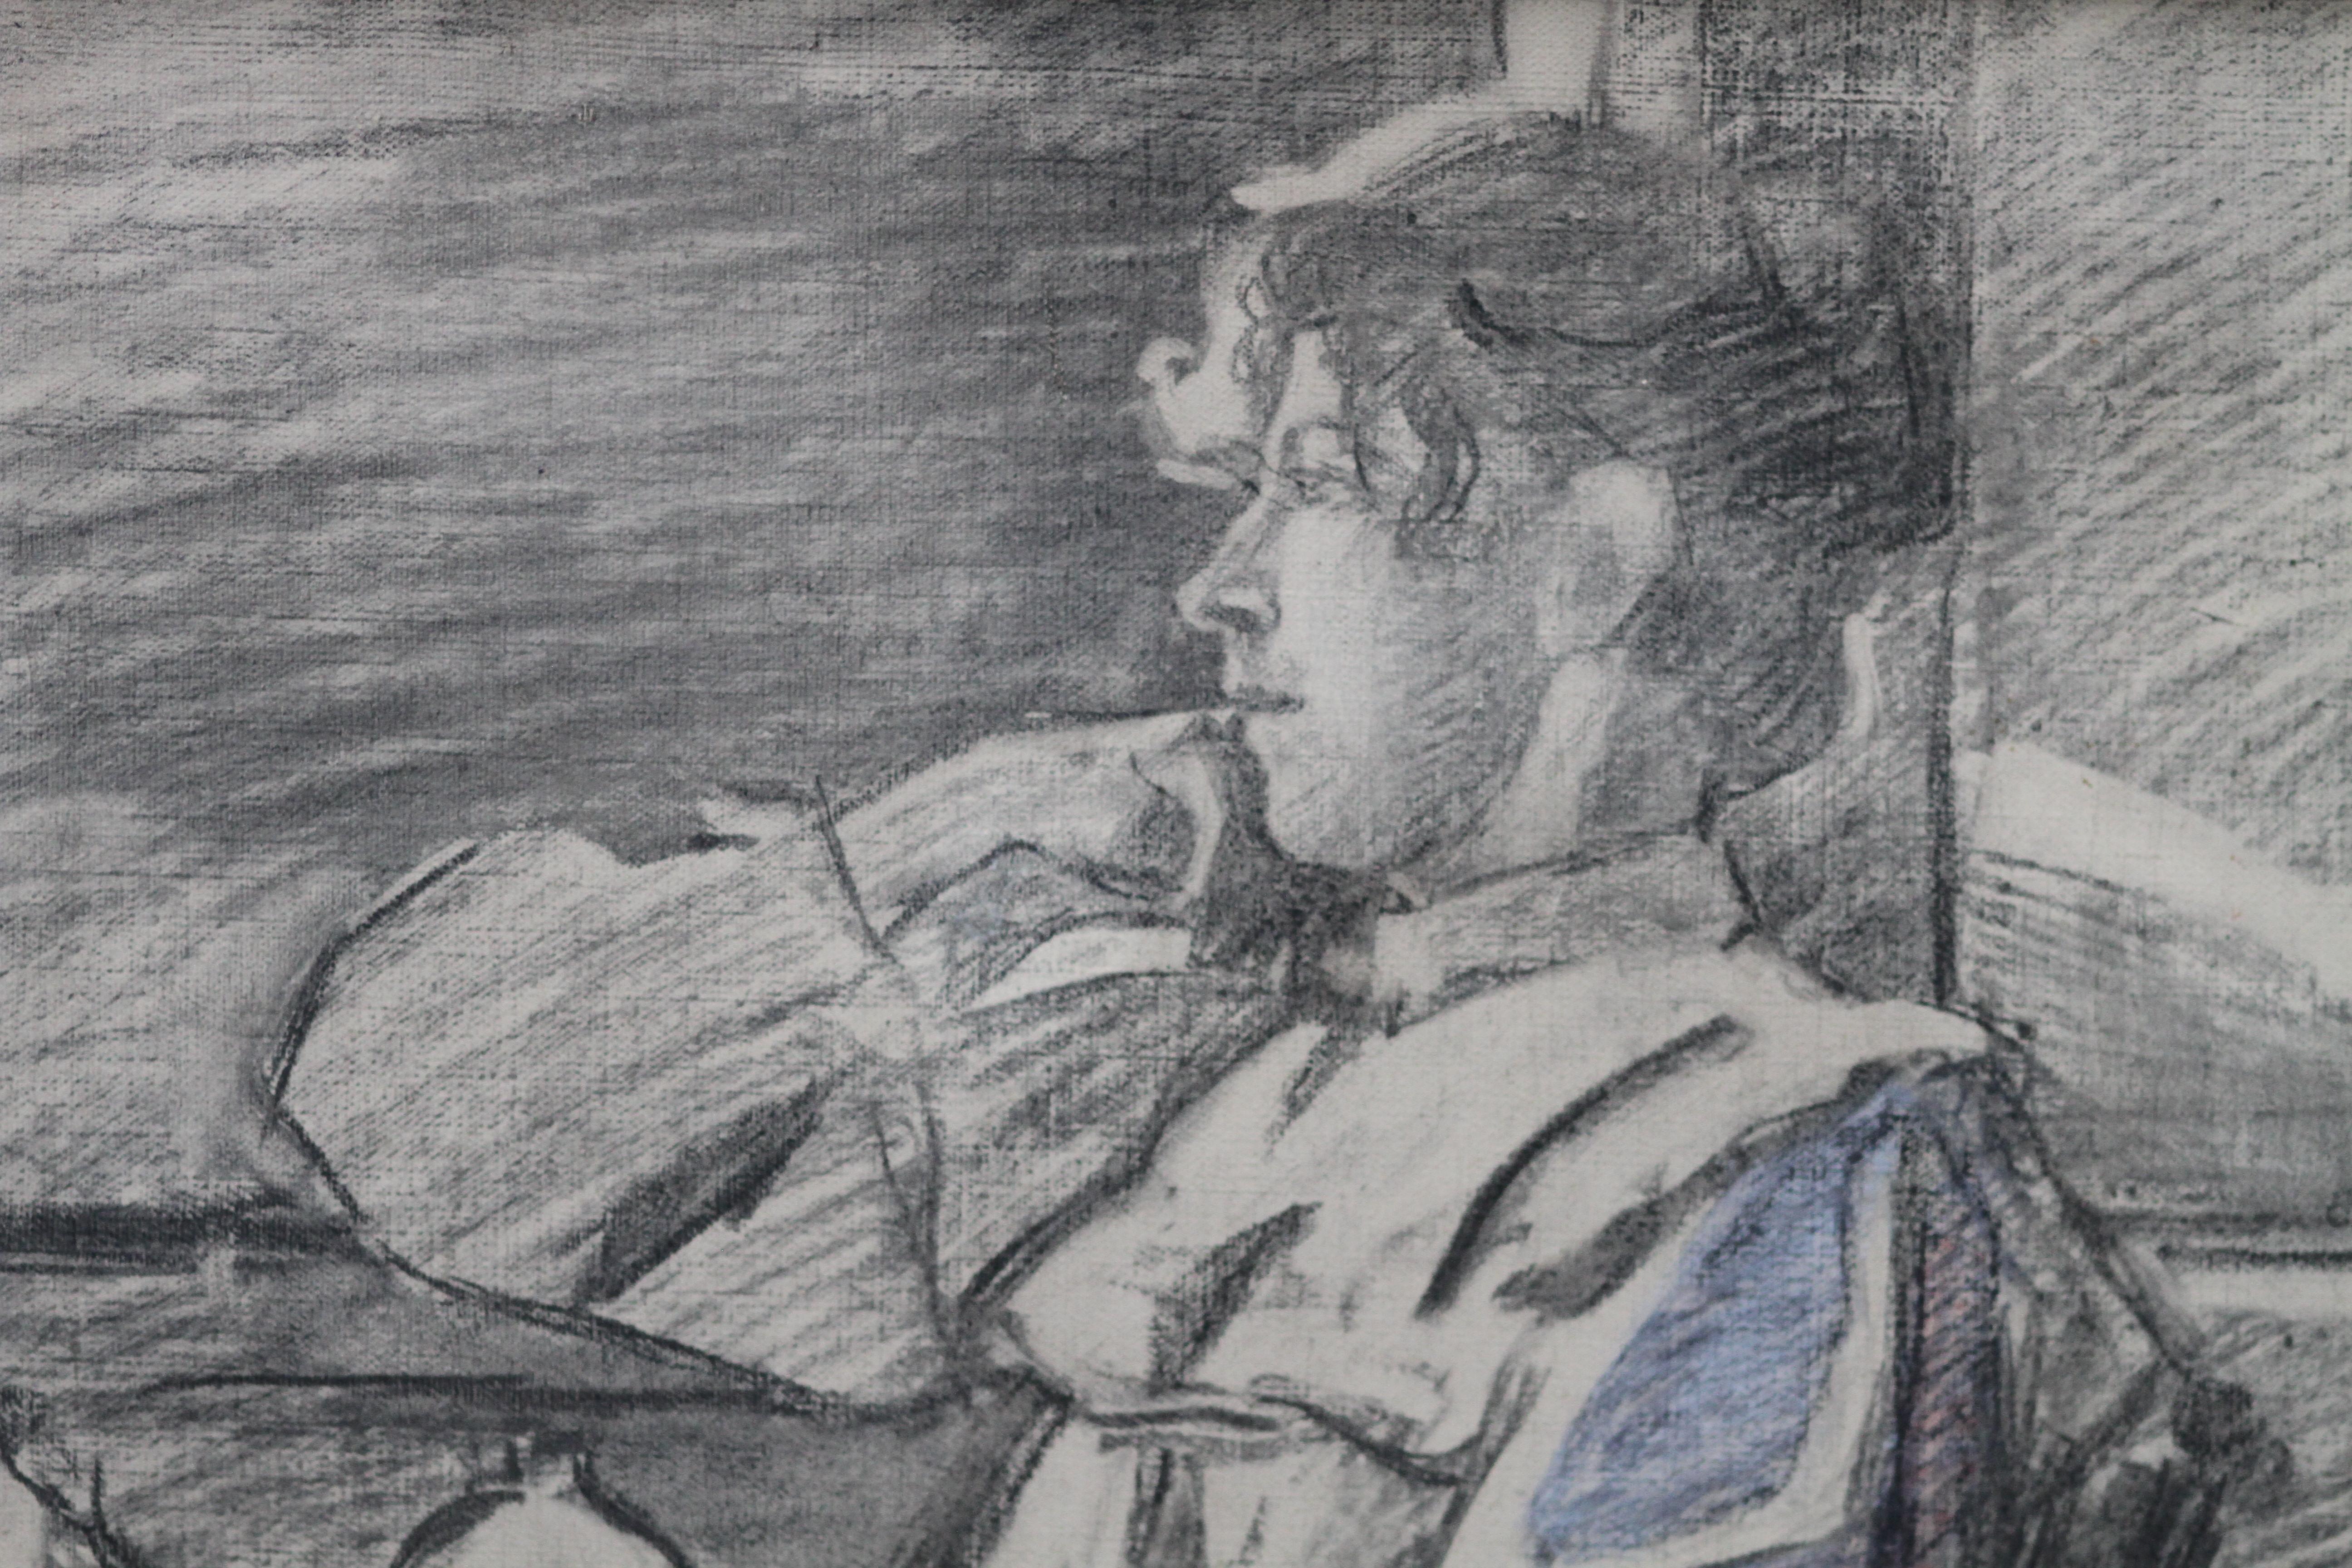 This lovely pencil and charcoal drawing is attributed to circle of French noted artist Jacques Joseph Tissot. Created around 1880 the drawing is of a woman relaxing on a reclining chair outdoors, lost in contemplation or admiring the view. There is